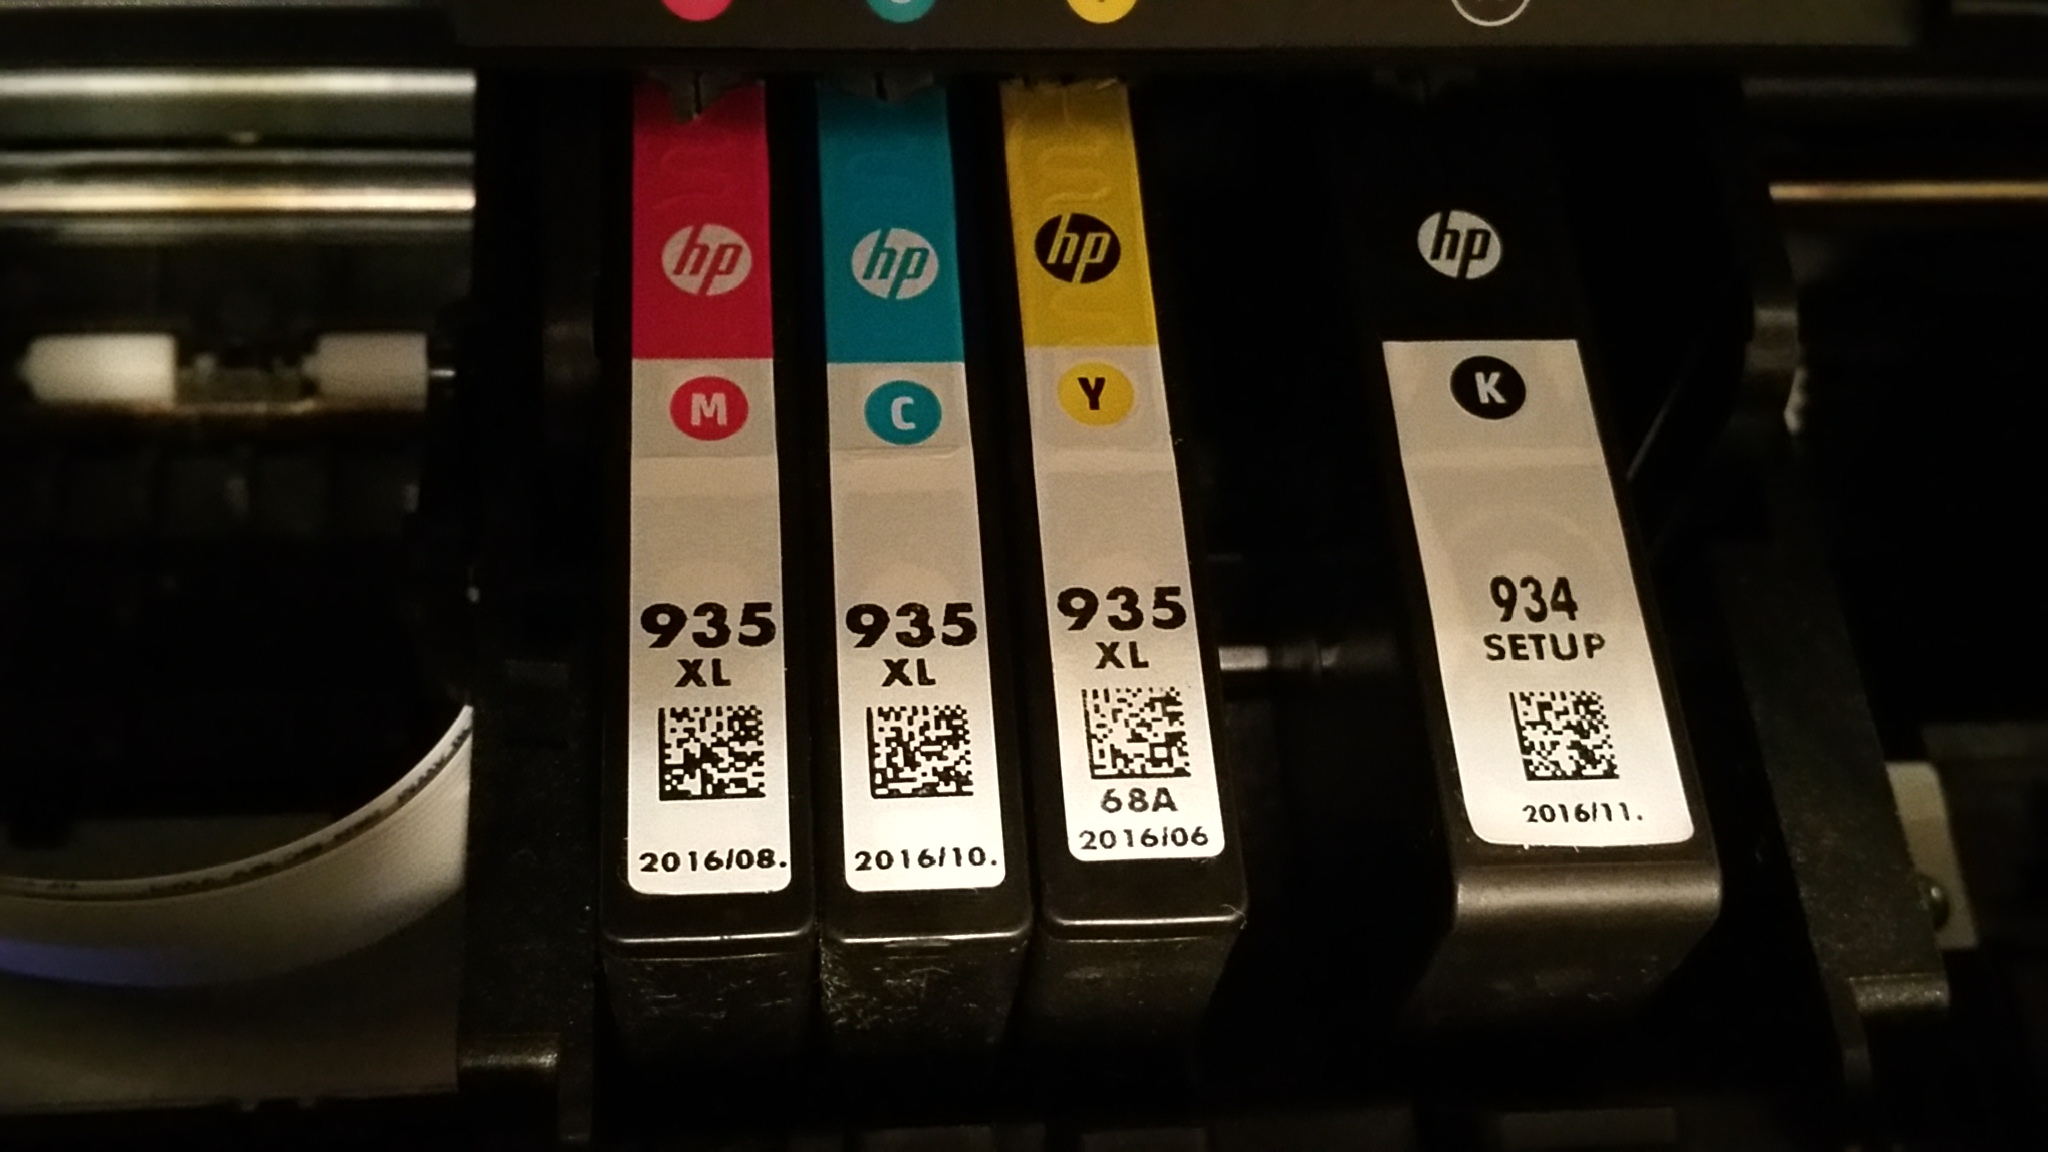 How do you replace the printhead in an HP printer?